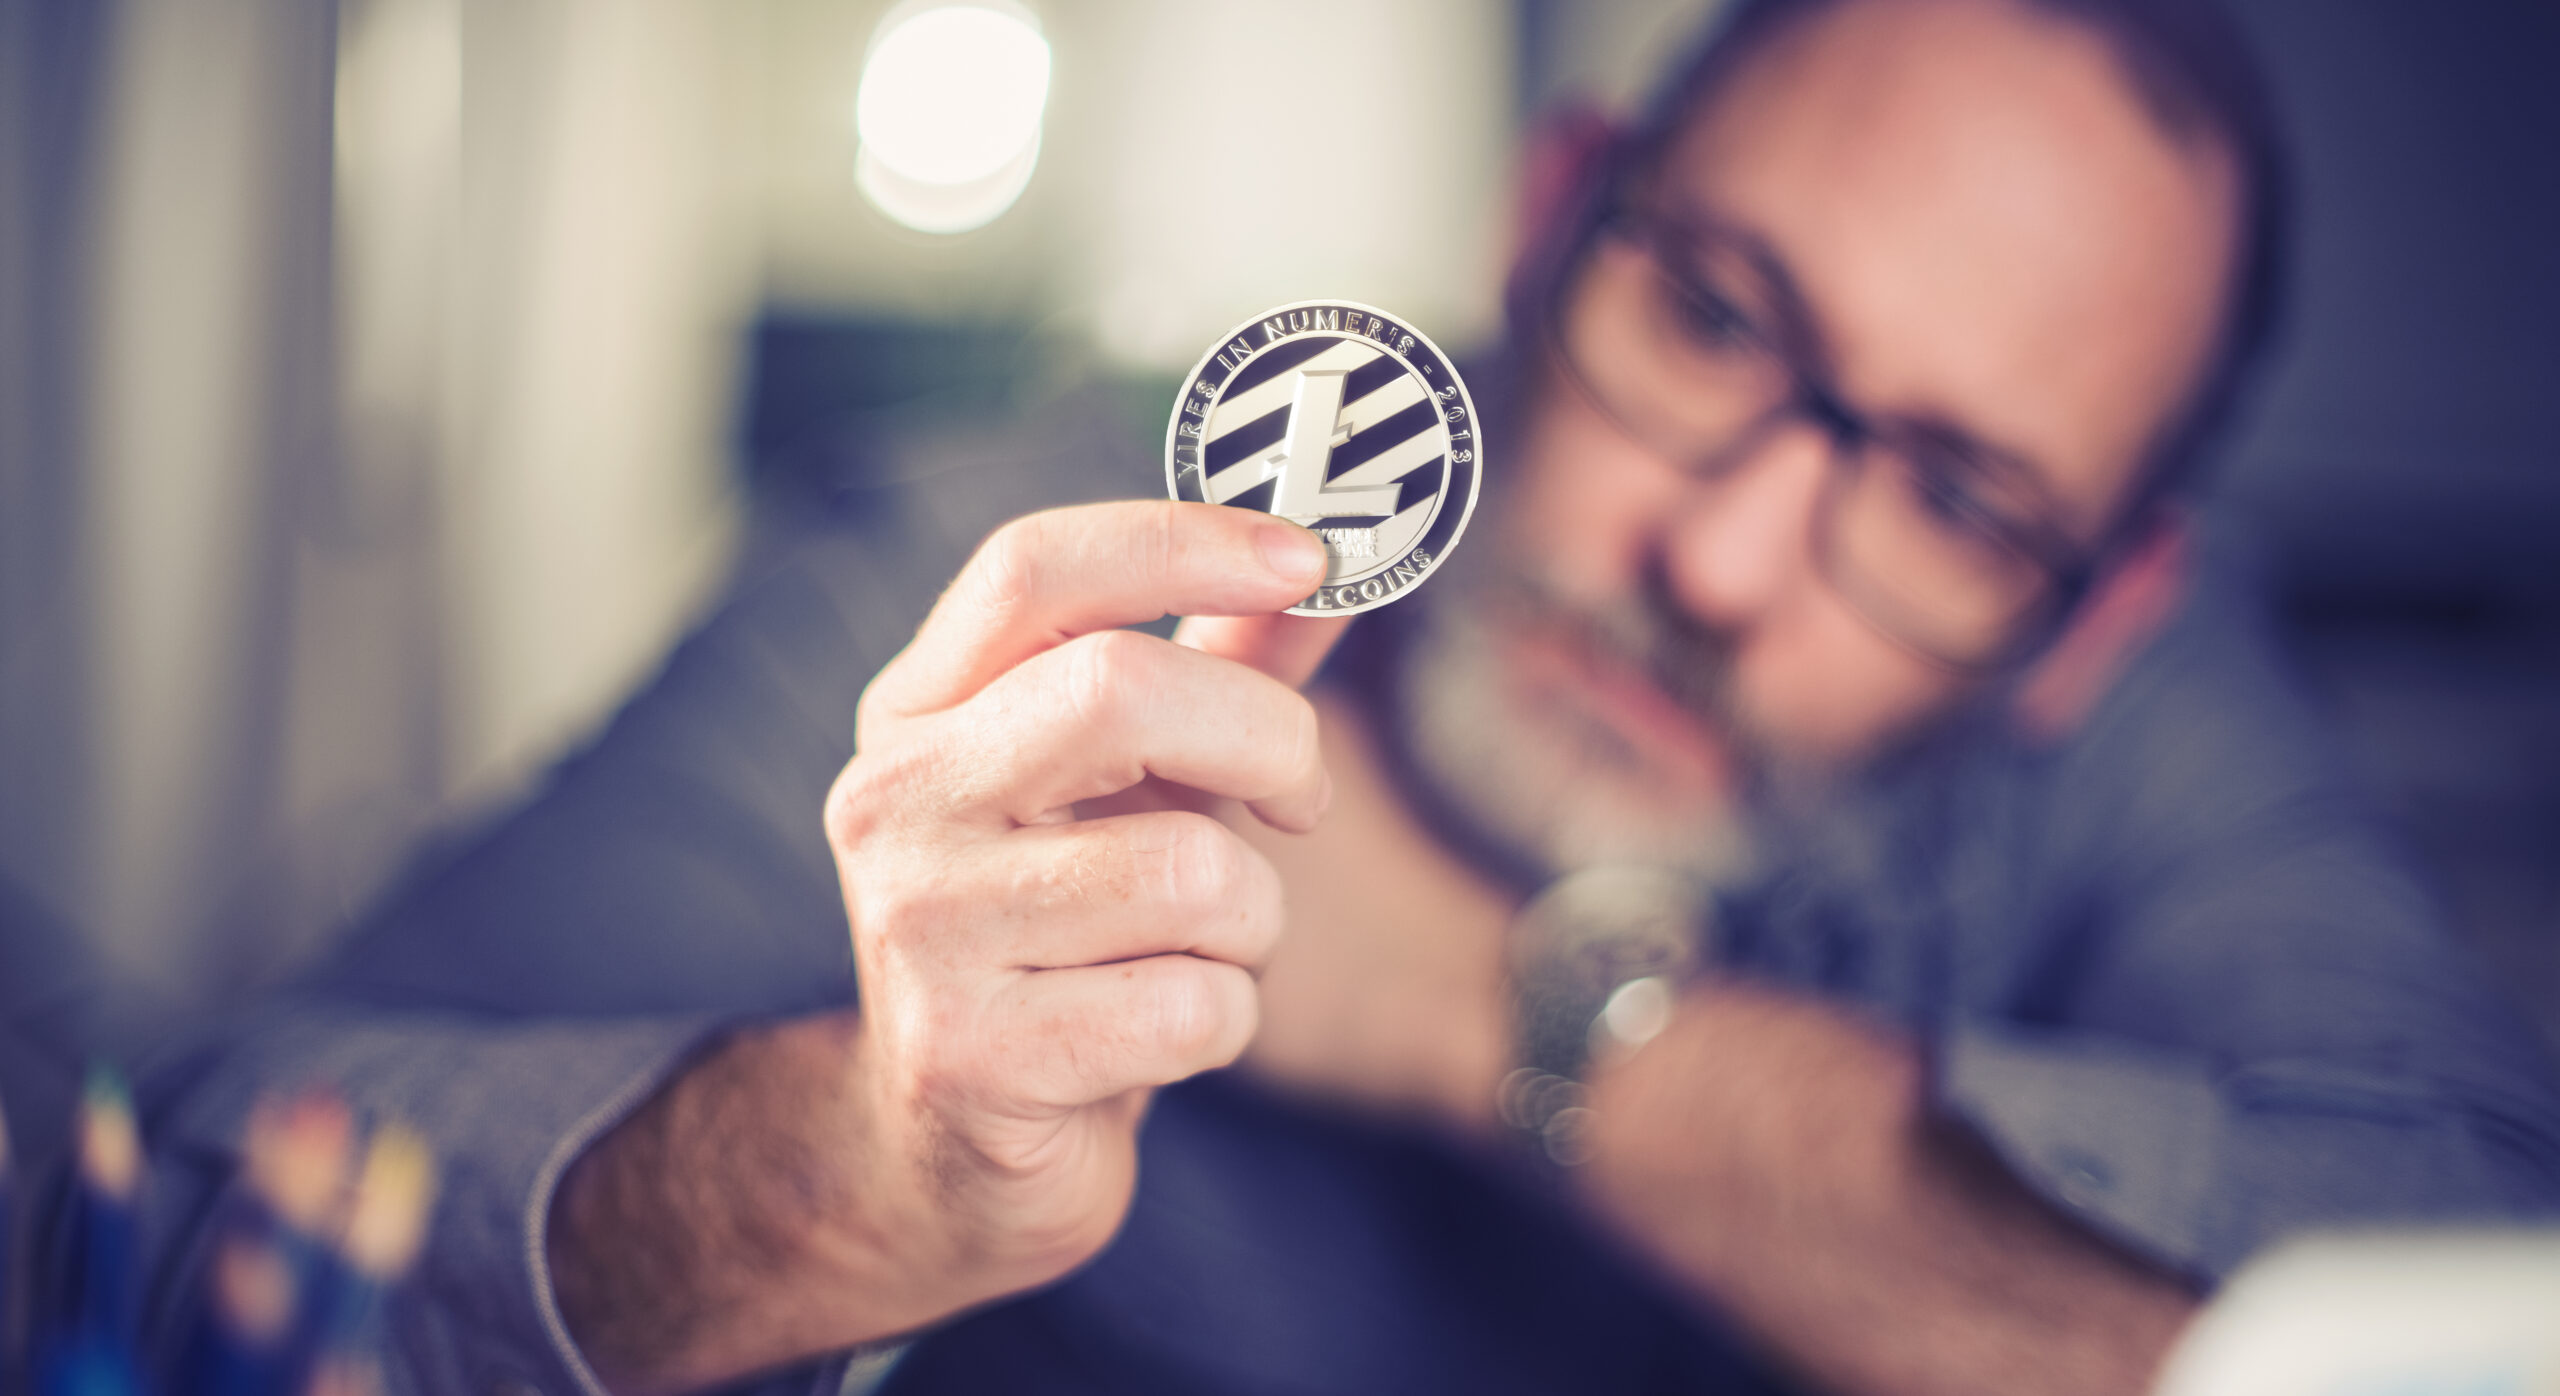 Geek insider, geekinsider, geekinsider. Com,, litecoin's scalability solutions: segwit and lightning network explained, crypto currency